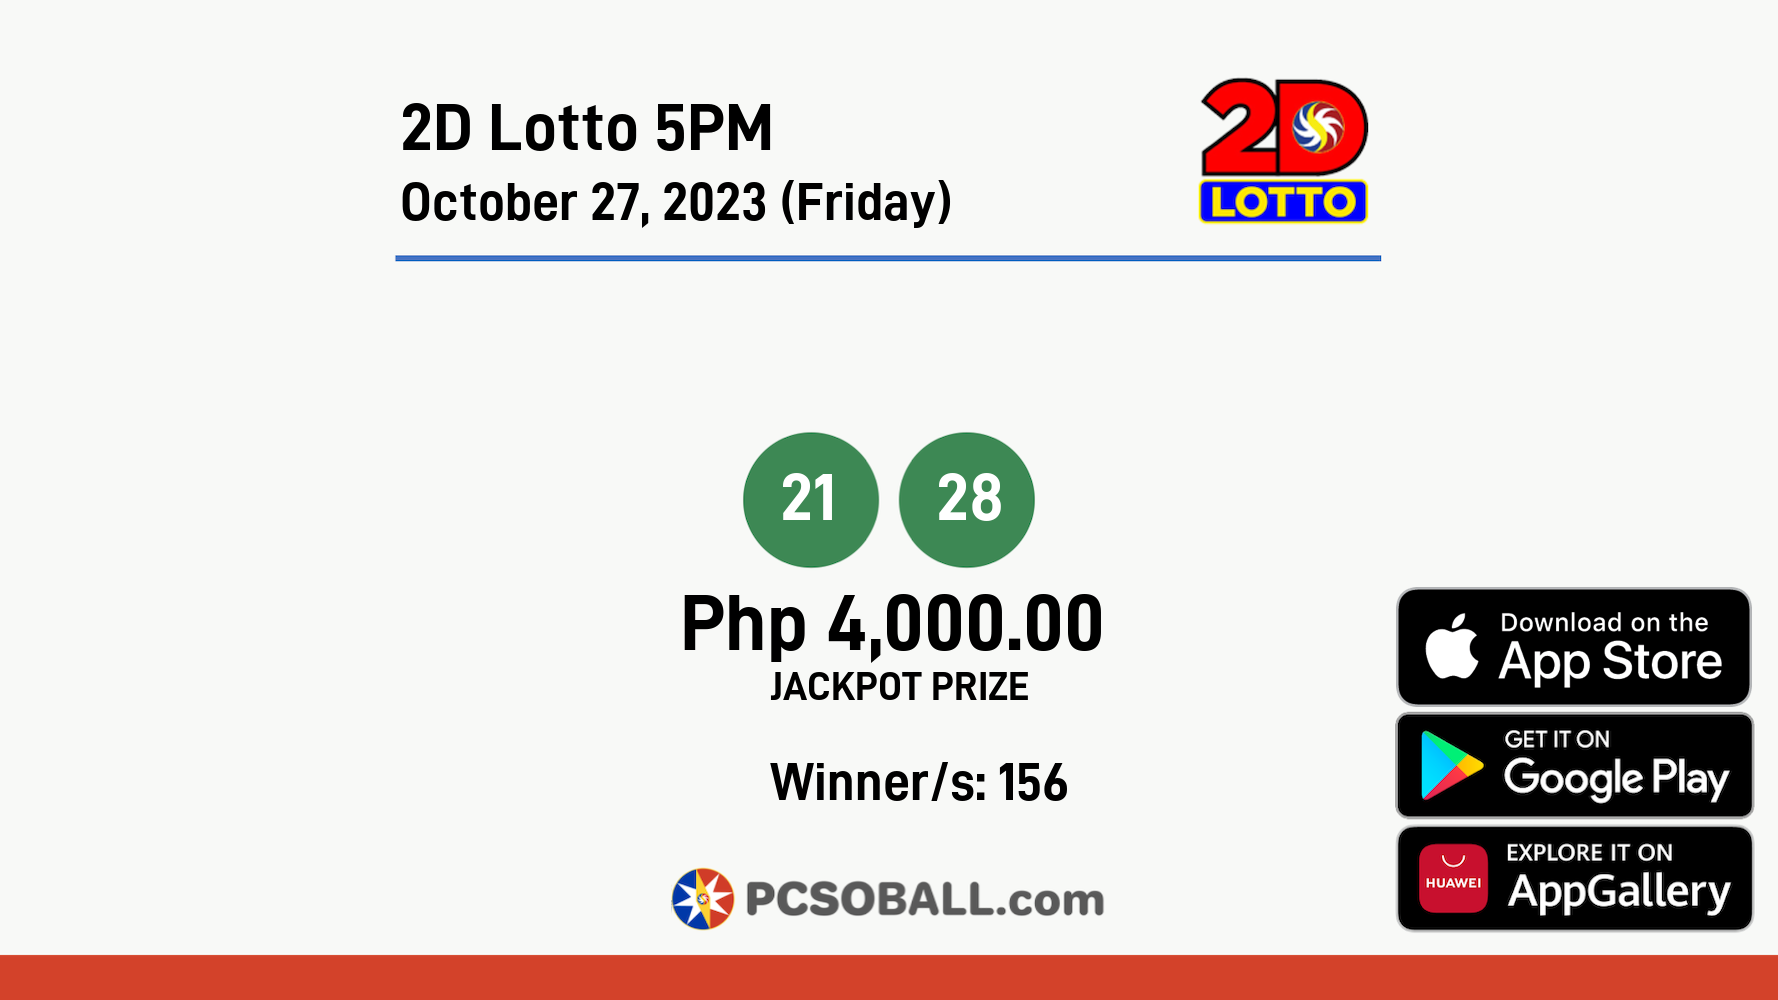 2D Lotto 5PM October 27, 2023 (Friday) Result